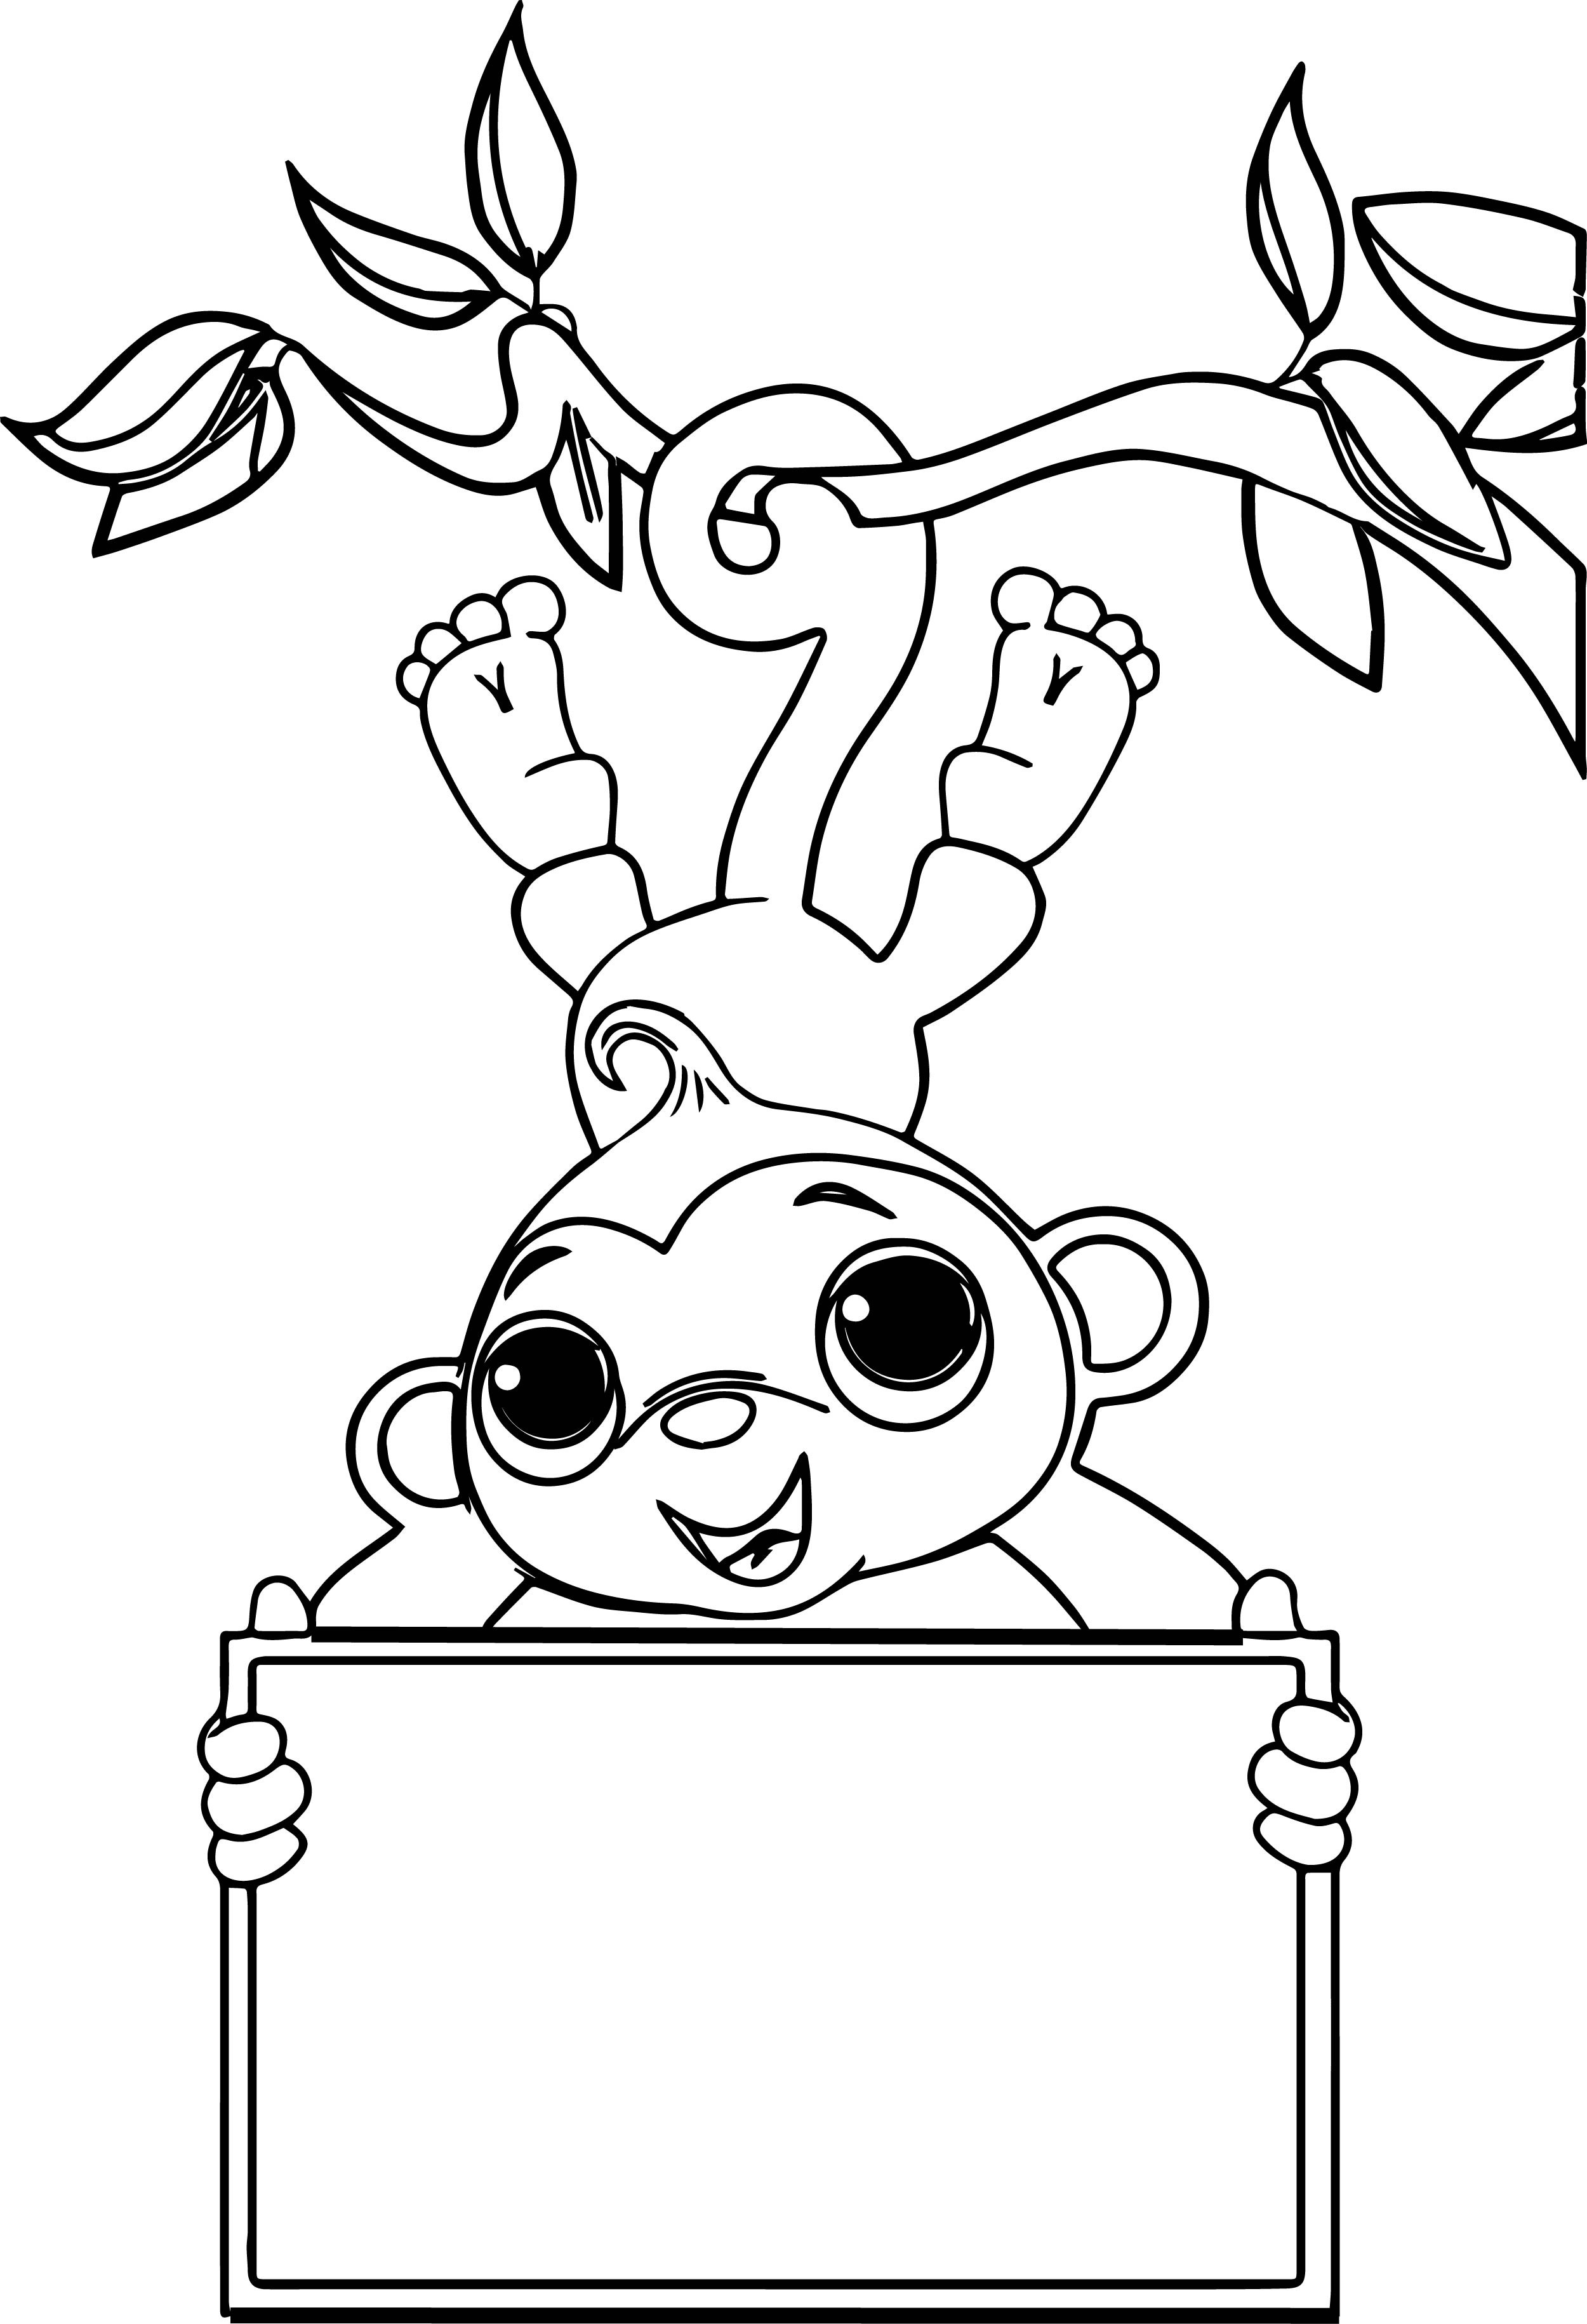 pictures of monkeys to color coloring pages of monkeys kids learning activity pictures of monkeys to color